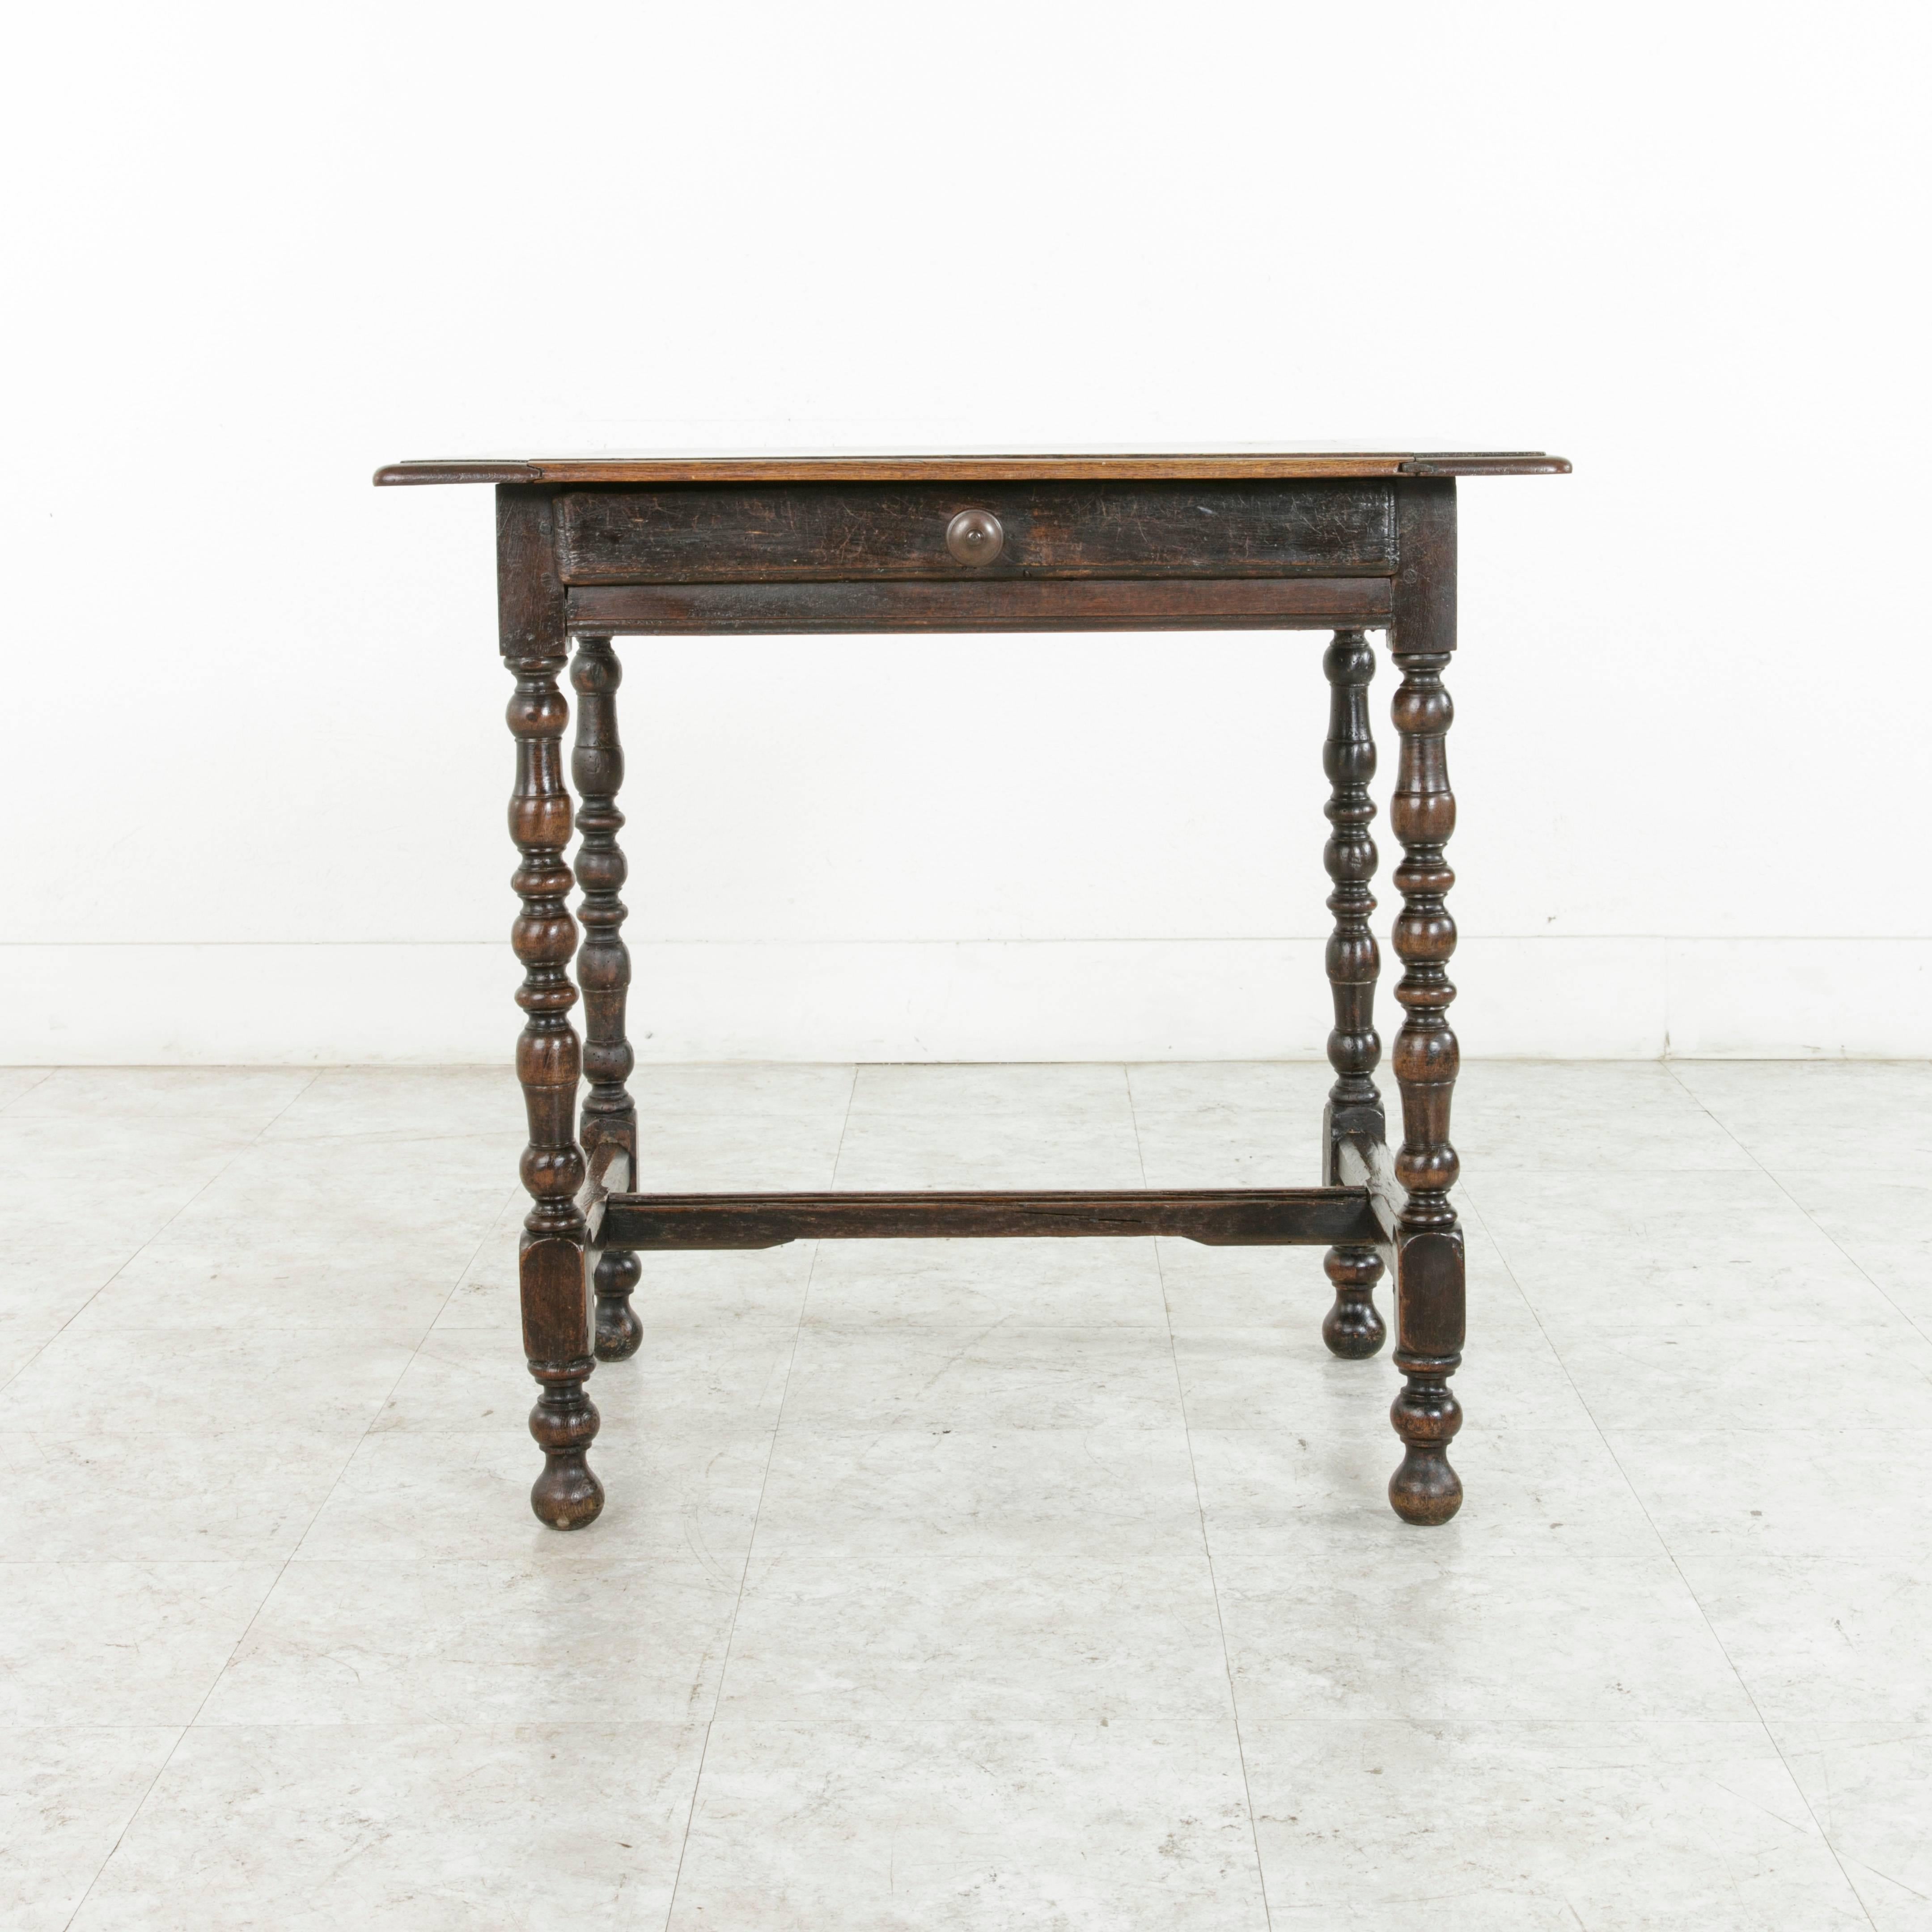 This French Louis XIII style oak side table or end table features an 18th century base supporting a hand pegged bevelled oak top fashioned in the 19th century. A single drawer of dovetail construction with an iron drawer pull between the hand pegged